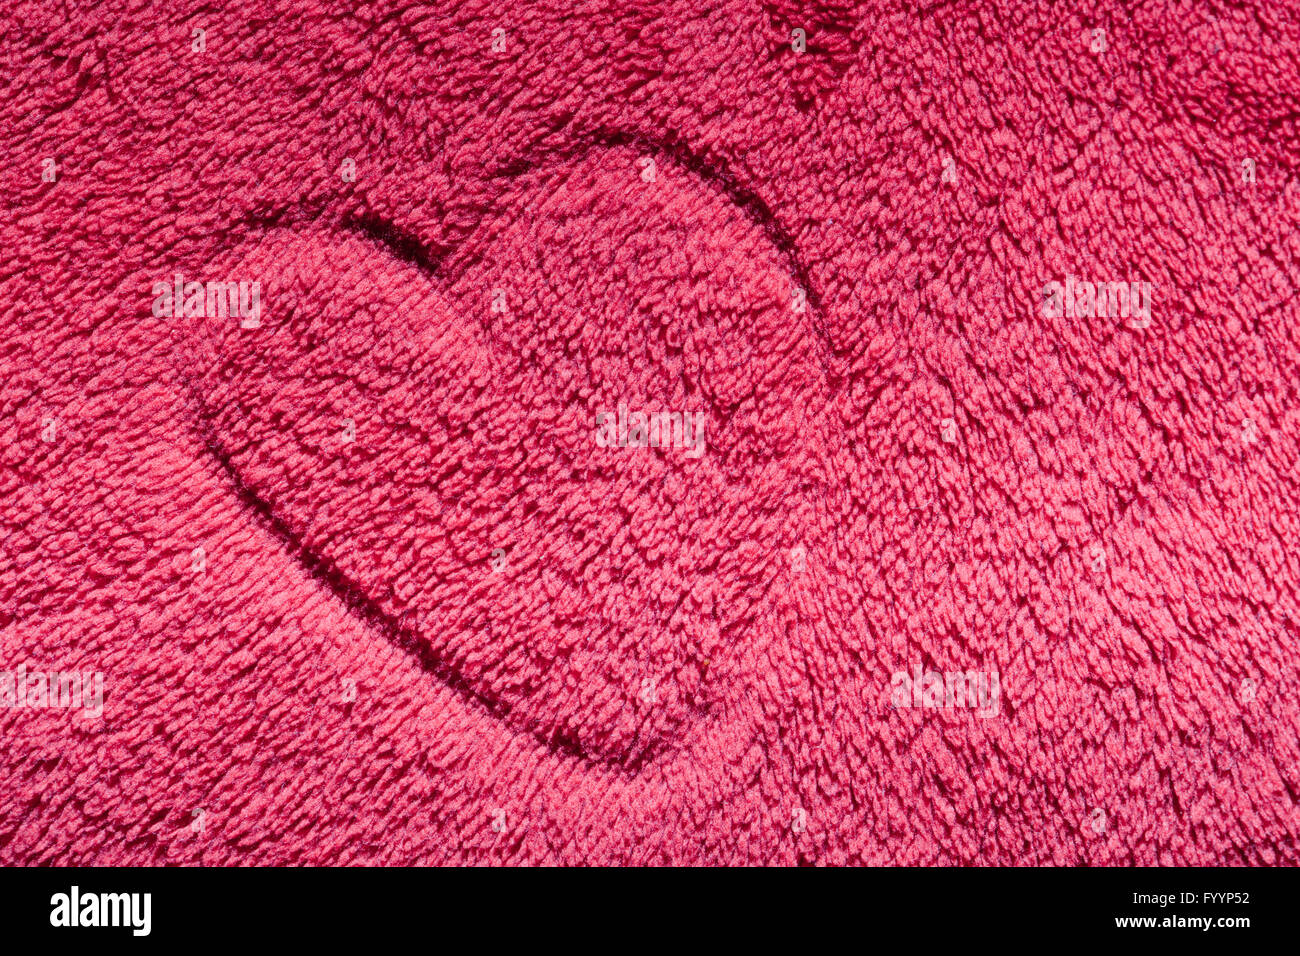 Heart on red furry cloth Stock Photo